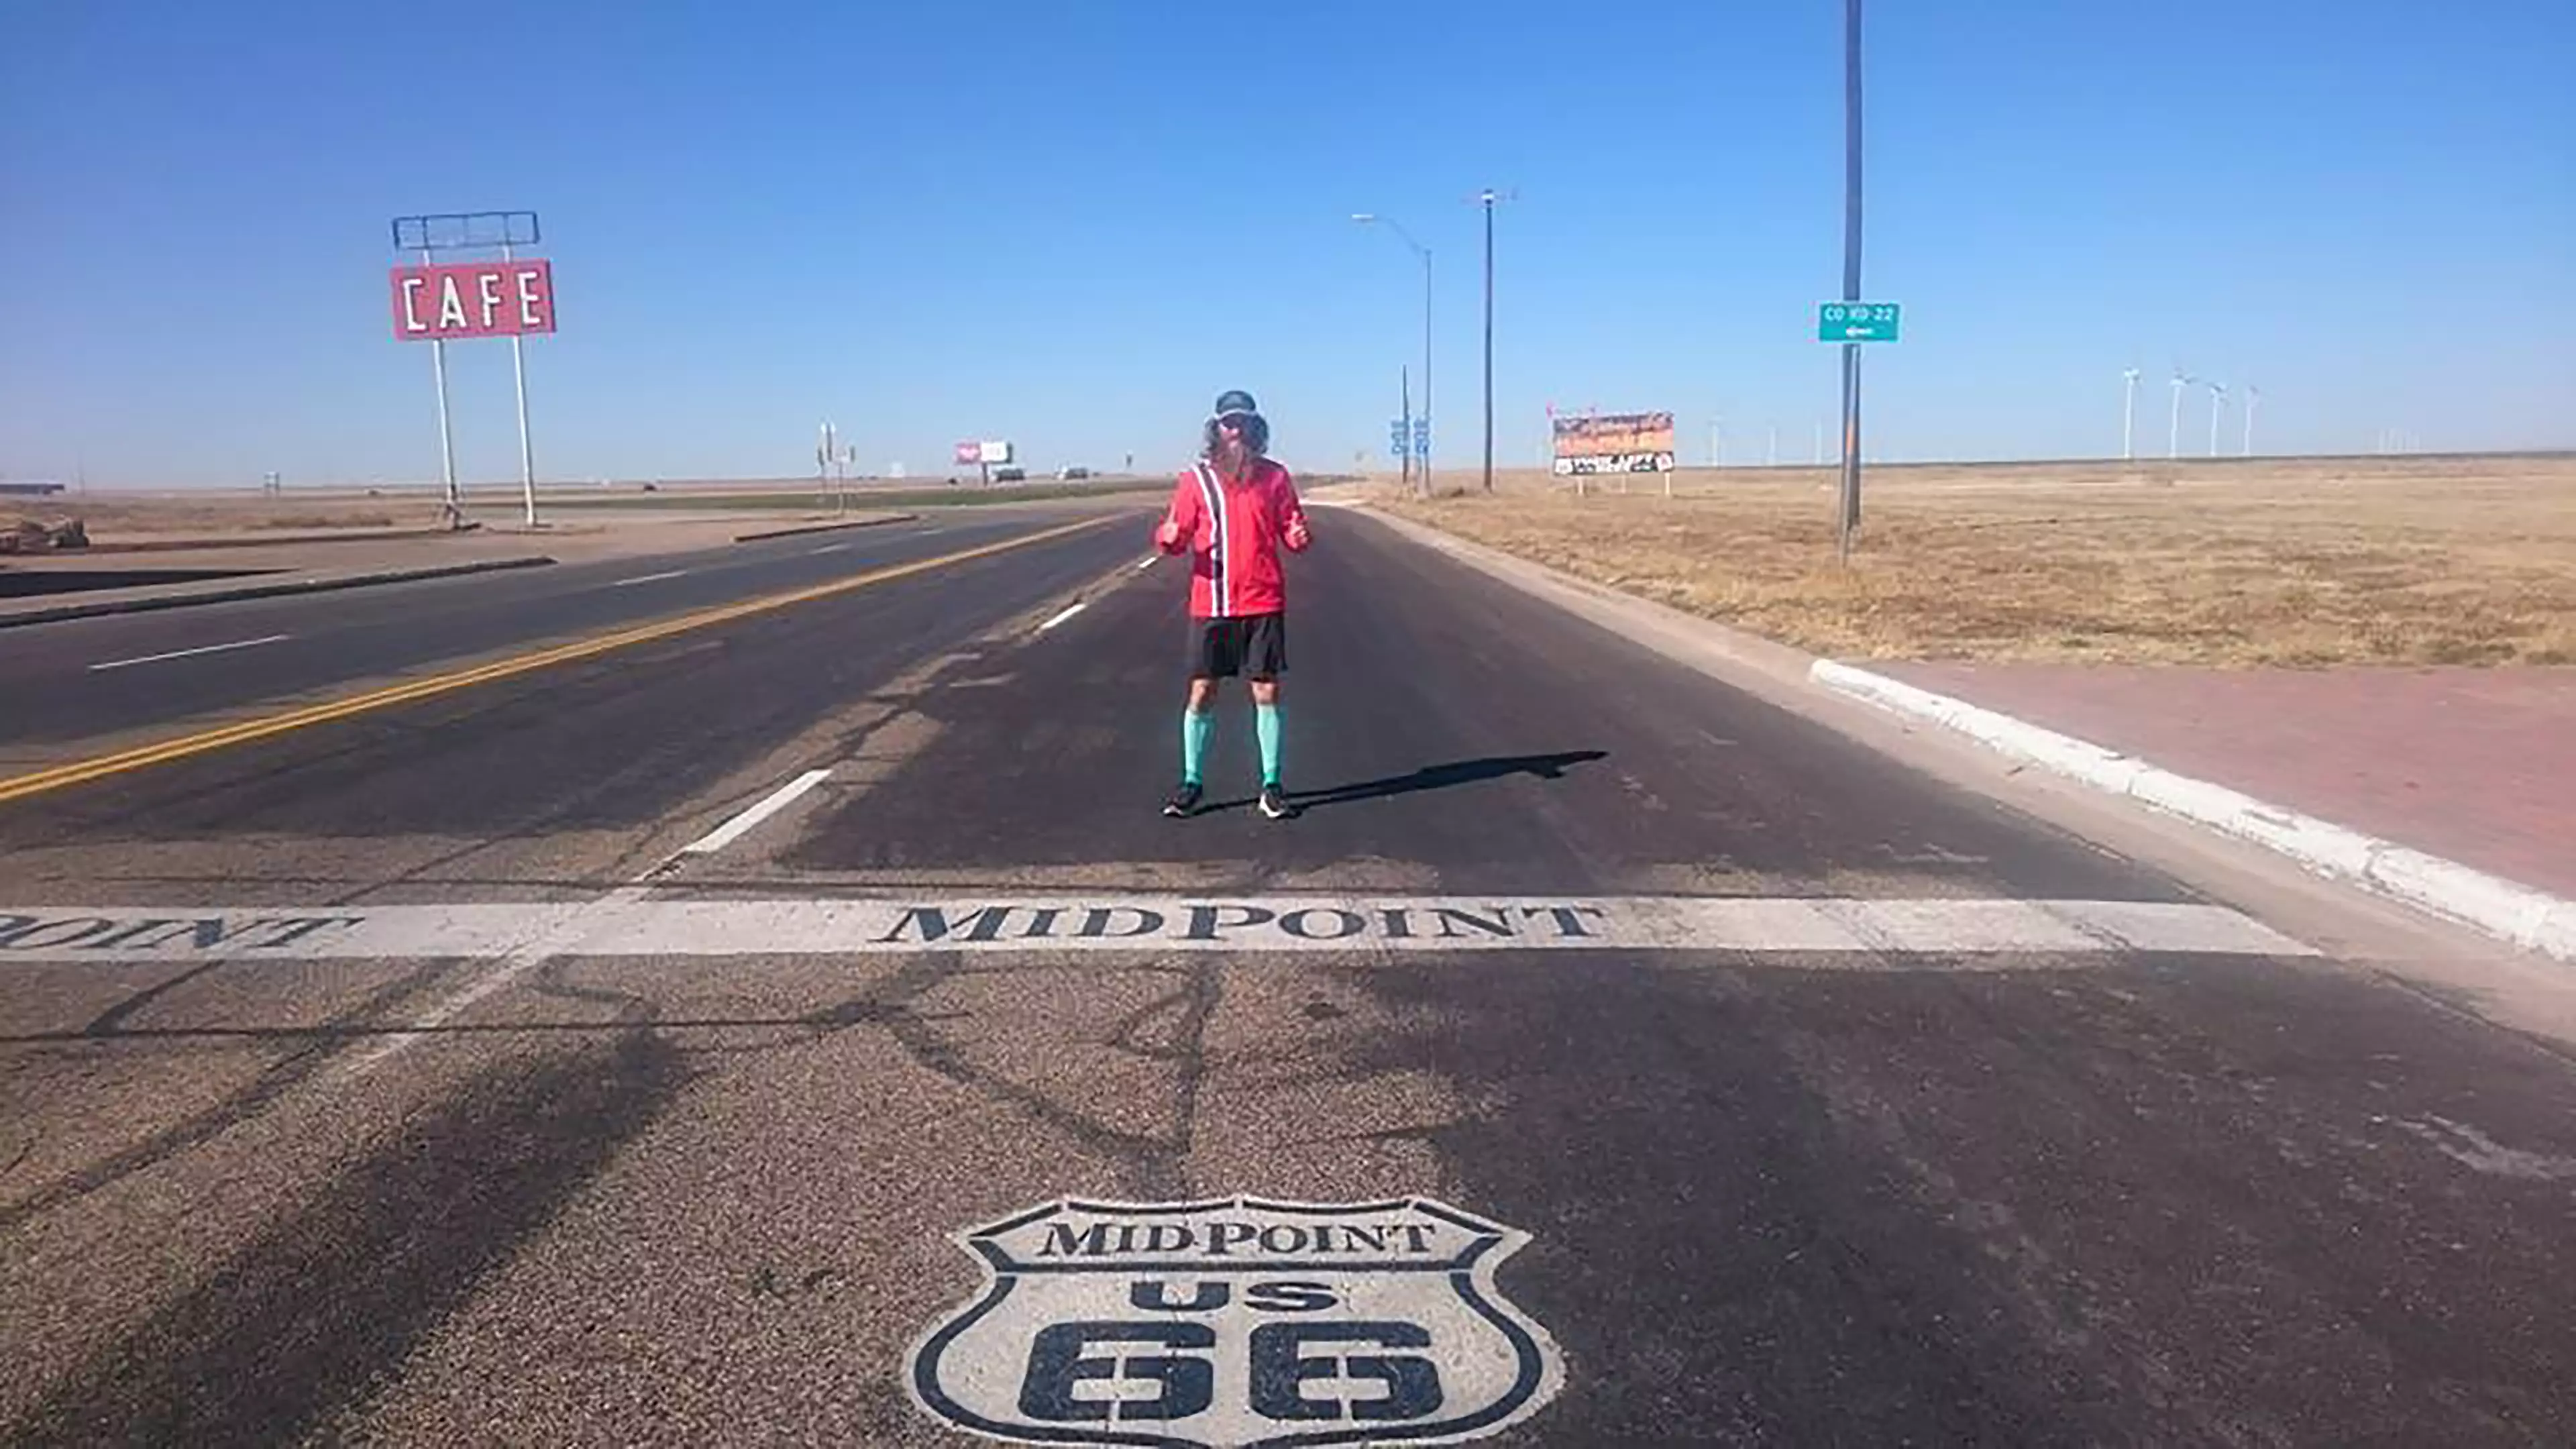 Man Runs More Than 15,000 Miles Recreating Route From 'Forrest Gump'